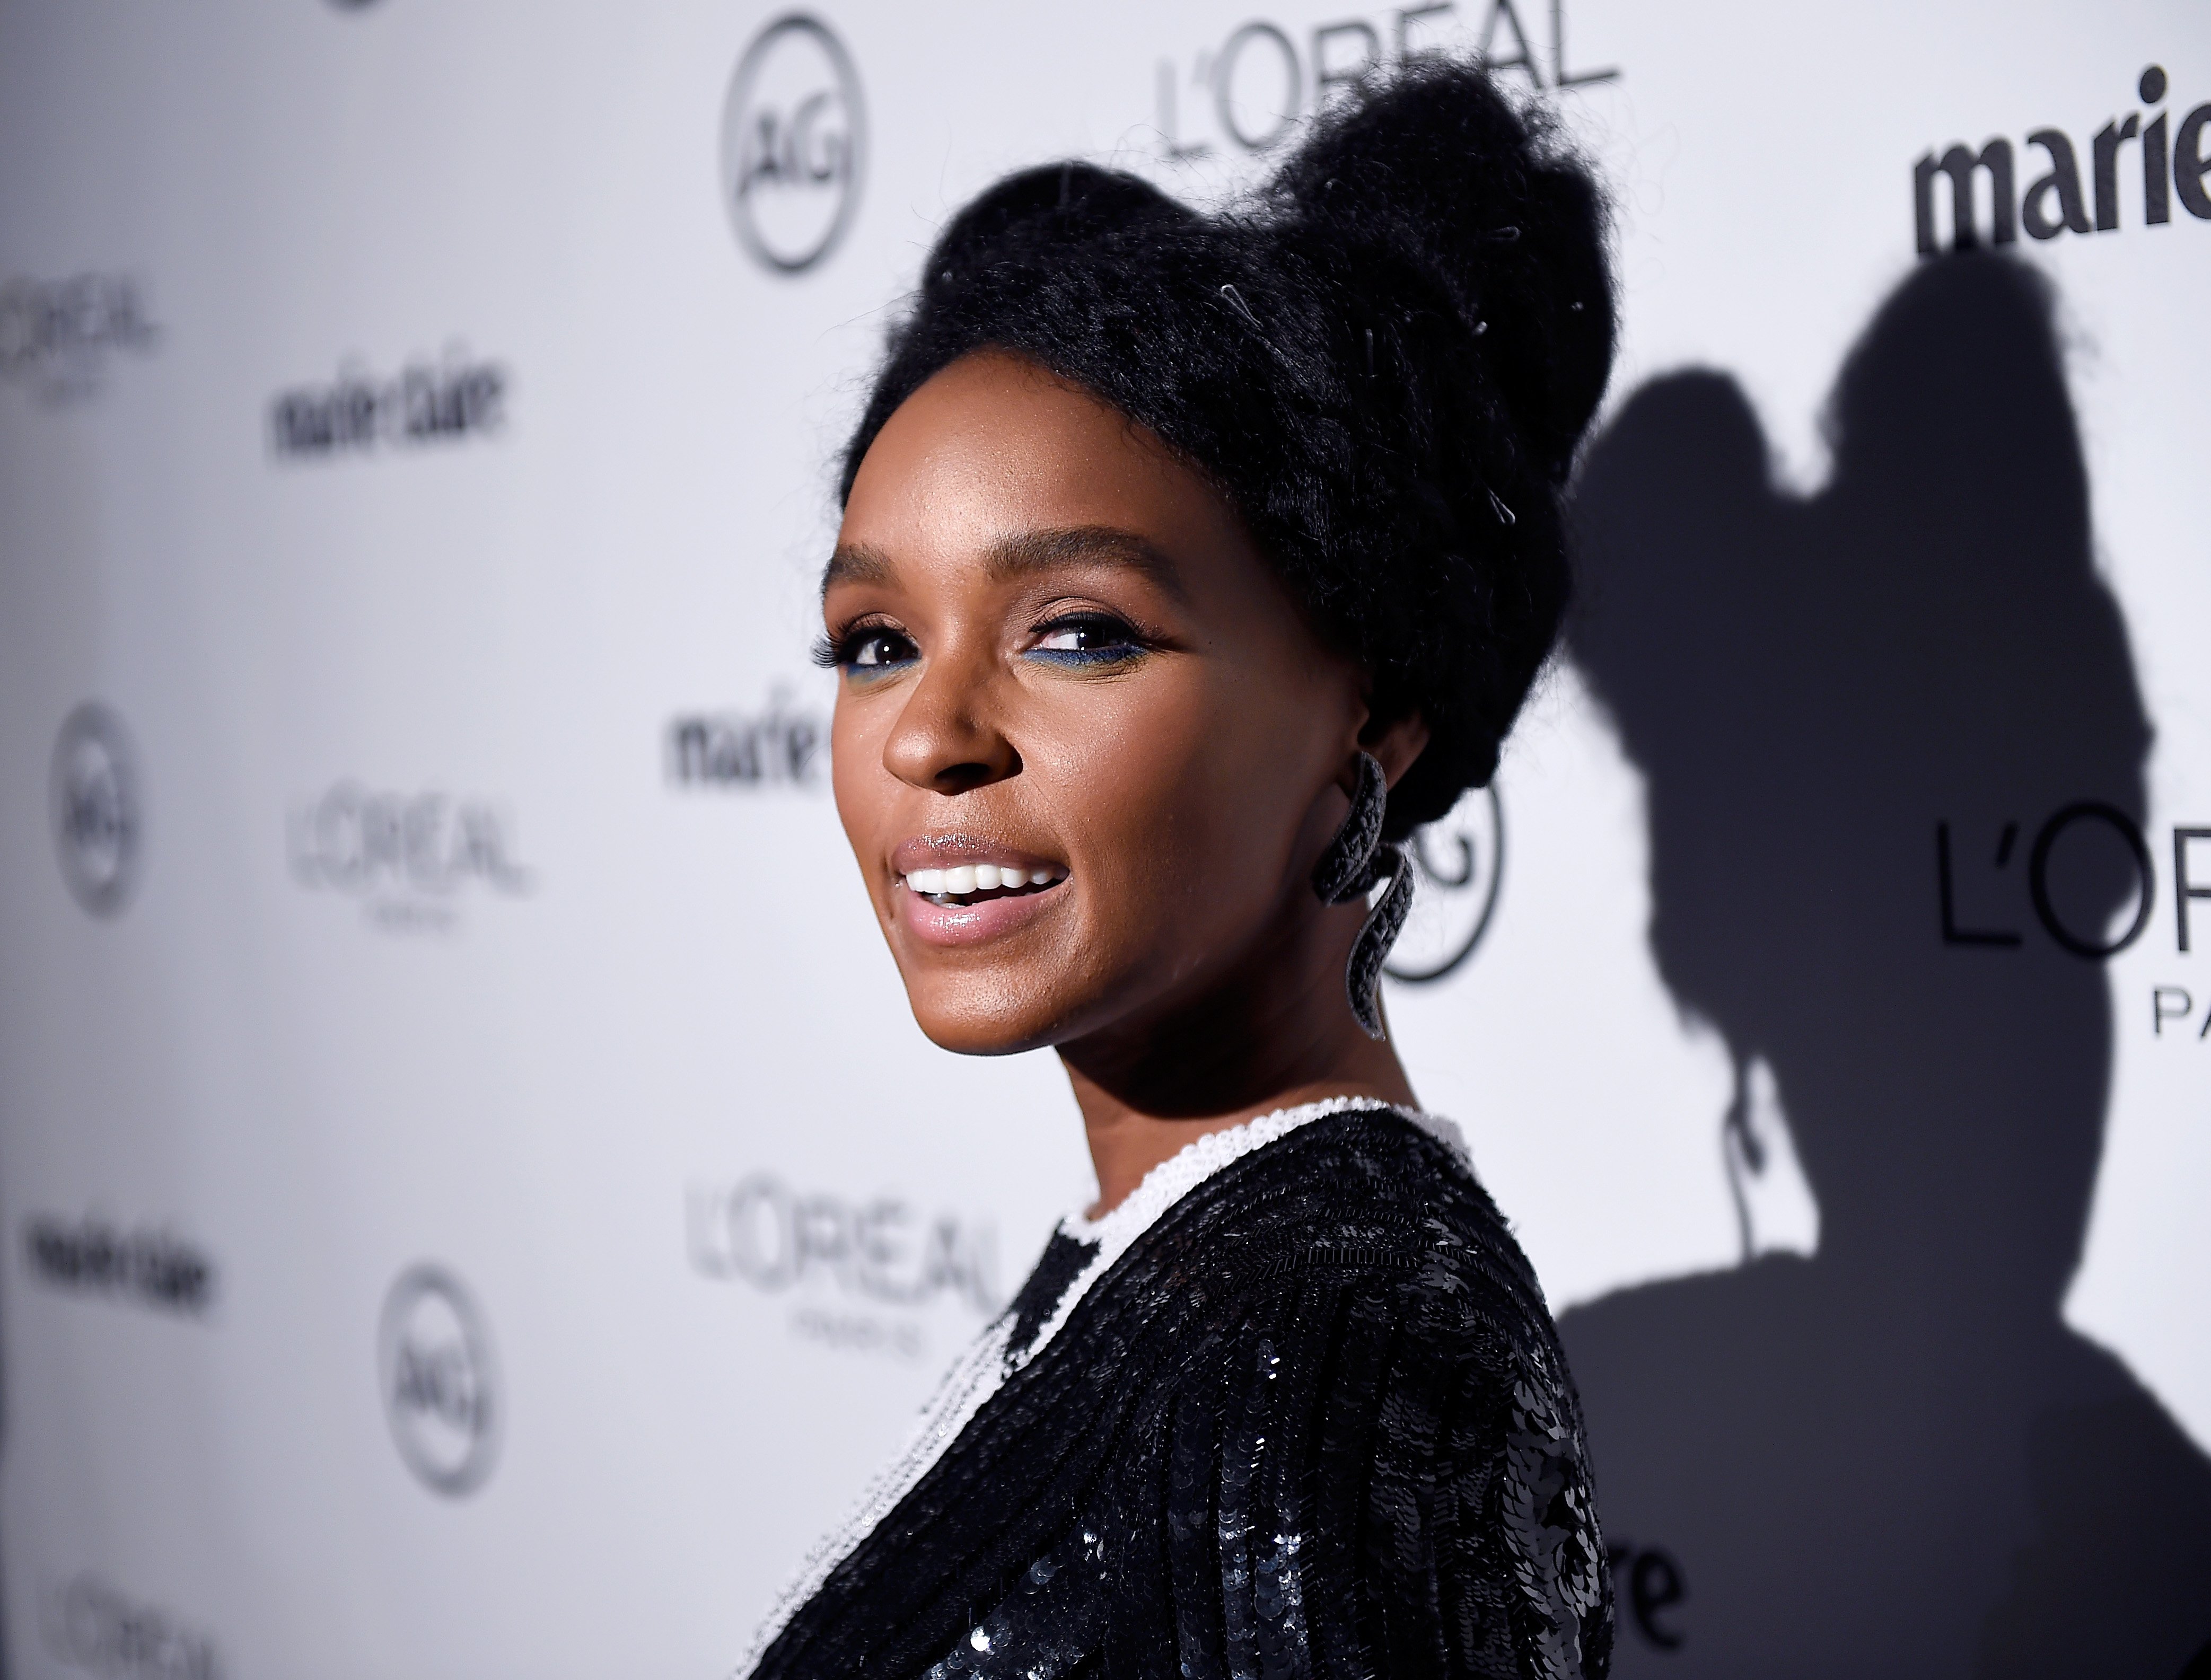 Janelle Monae poses at Marie Claire's Image Maker Awards 2017 on January 10, 2017. | Photo: Getty Images